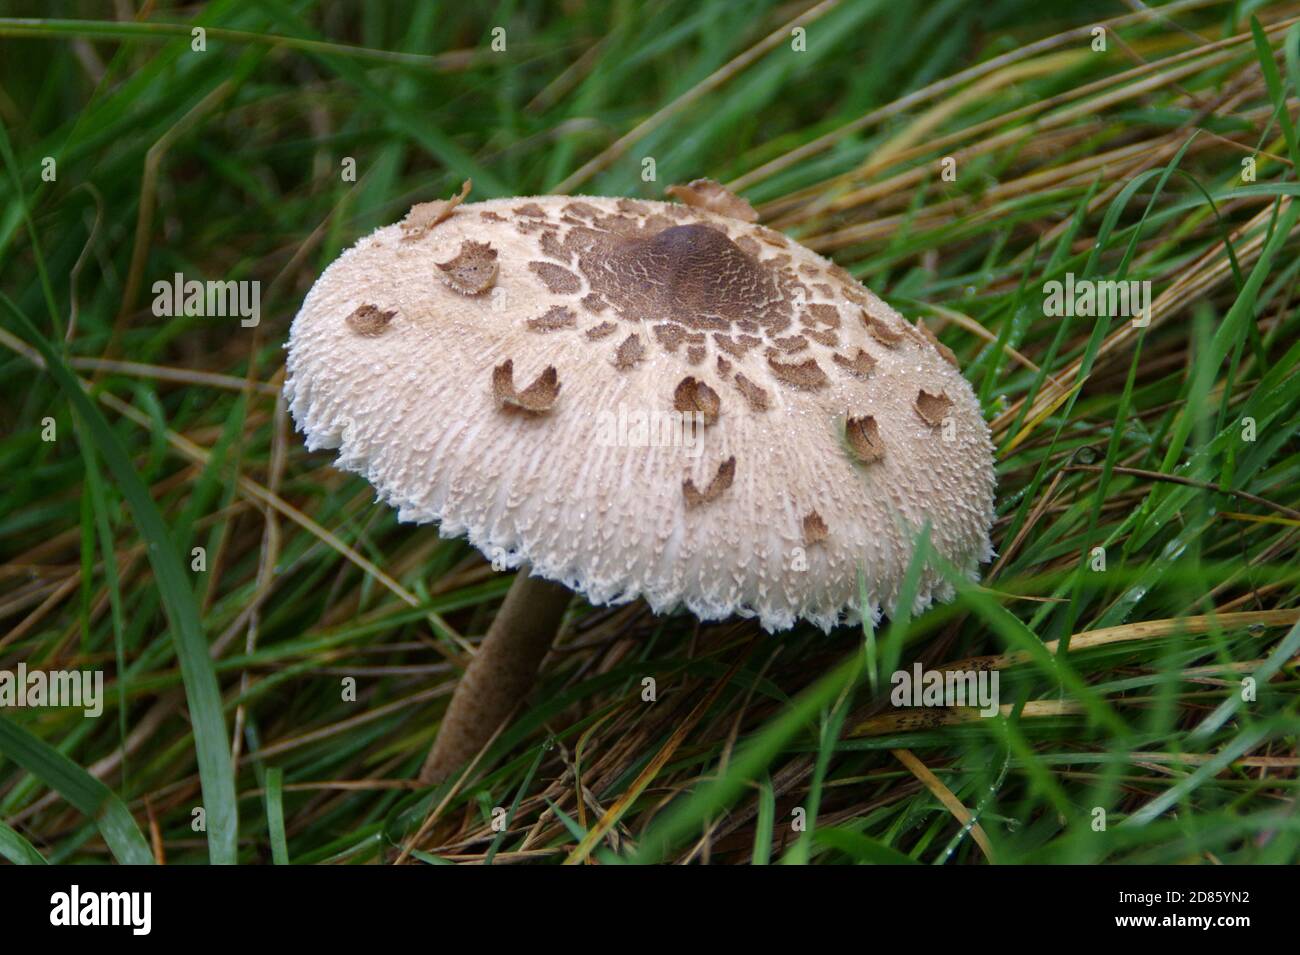 Kite mushroom in forest. Organic food in wild natural environment. Stock Photo